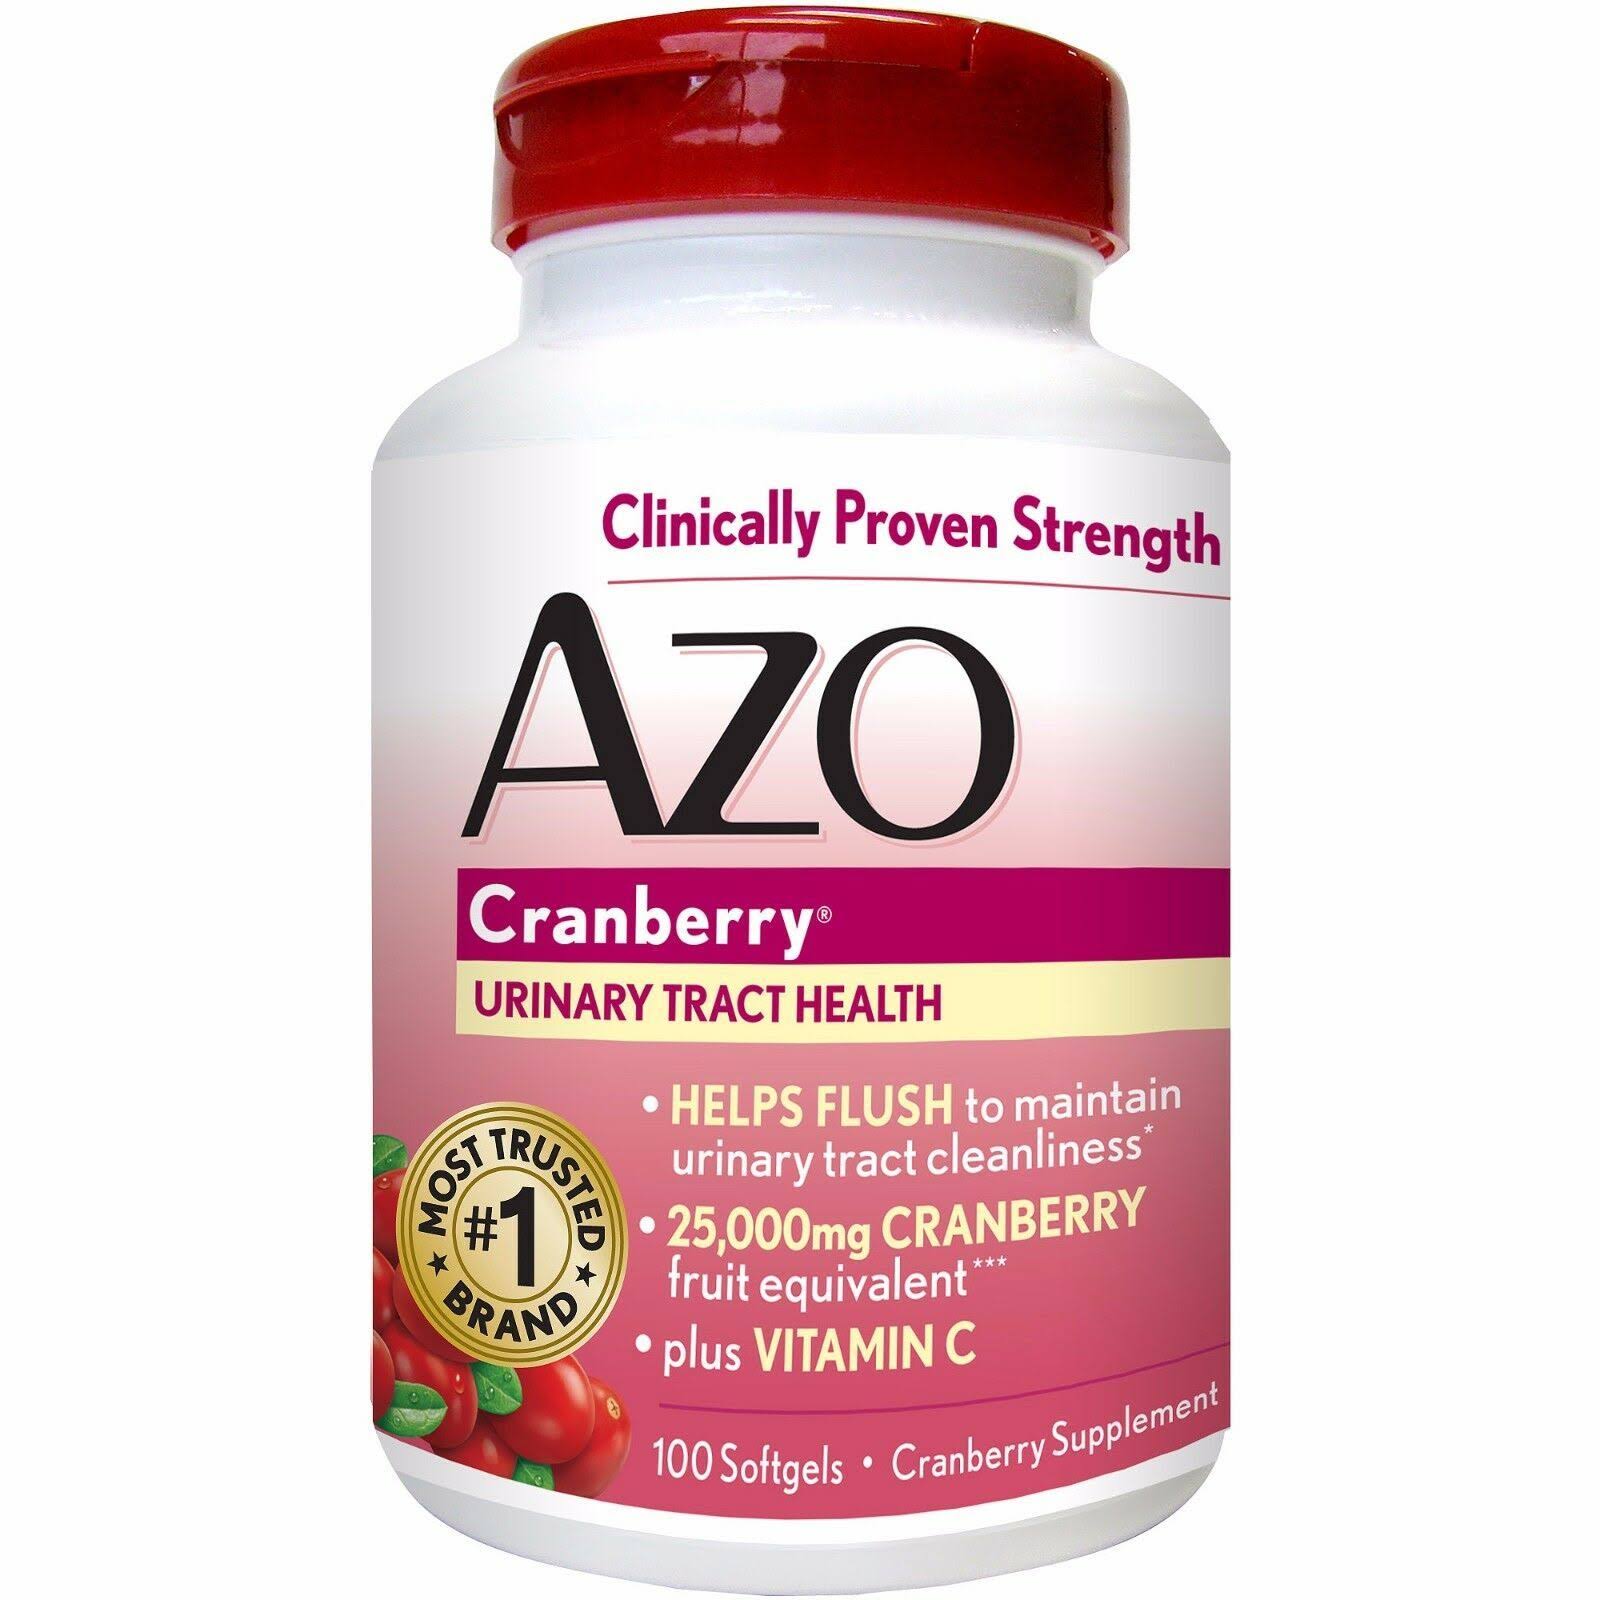 Azo Cranberry Urinary Tract Health Dietary Supplement - 100ct